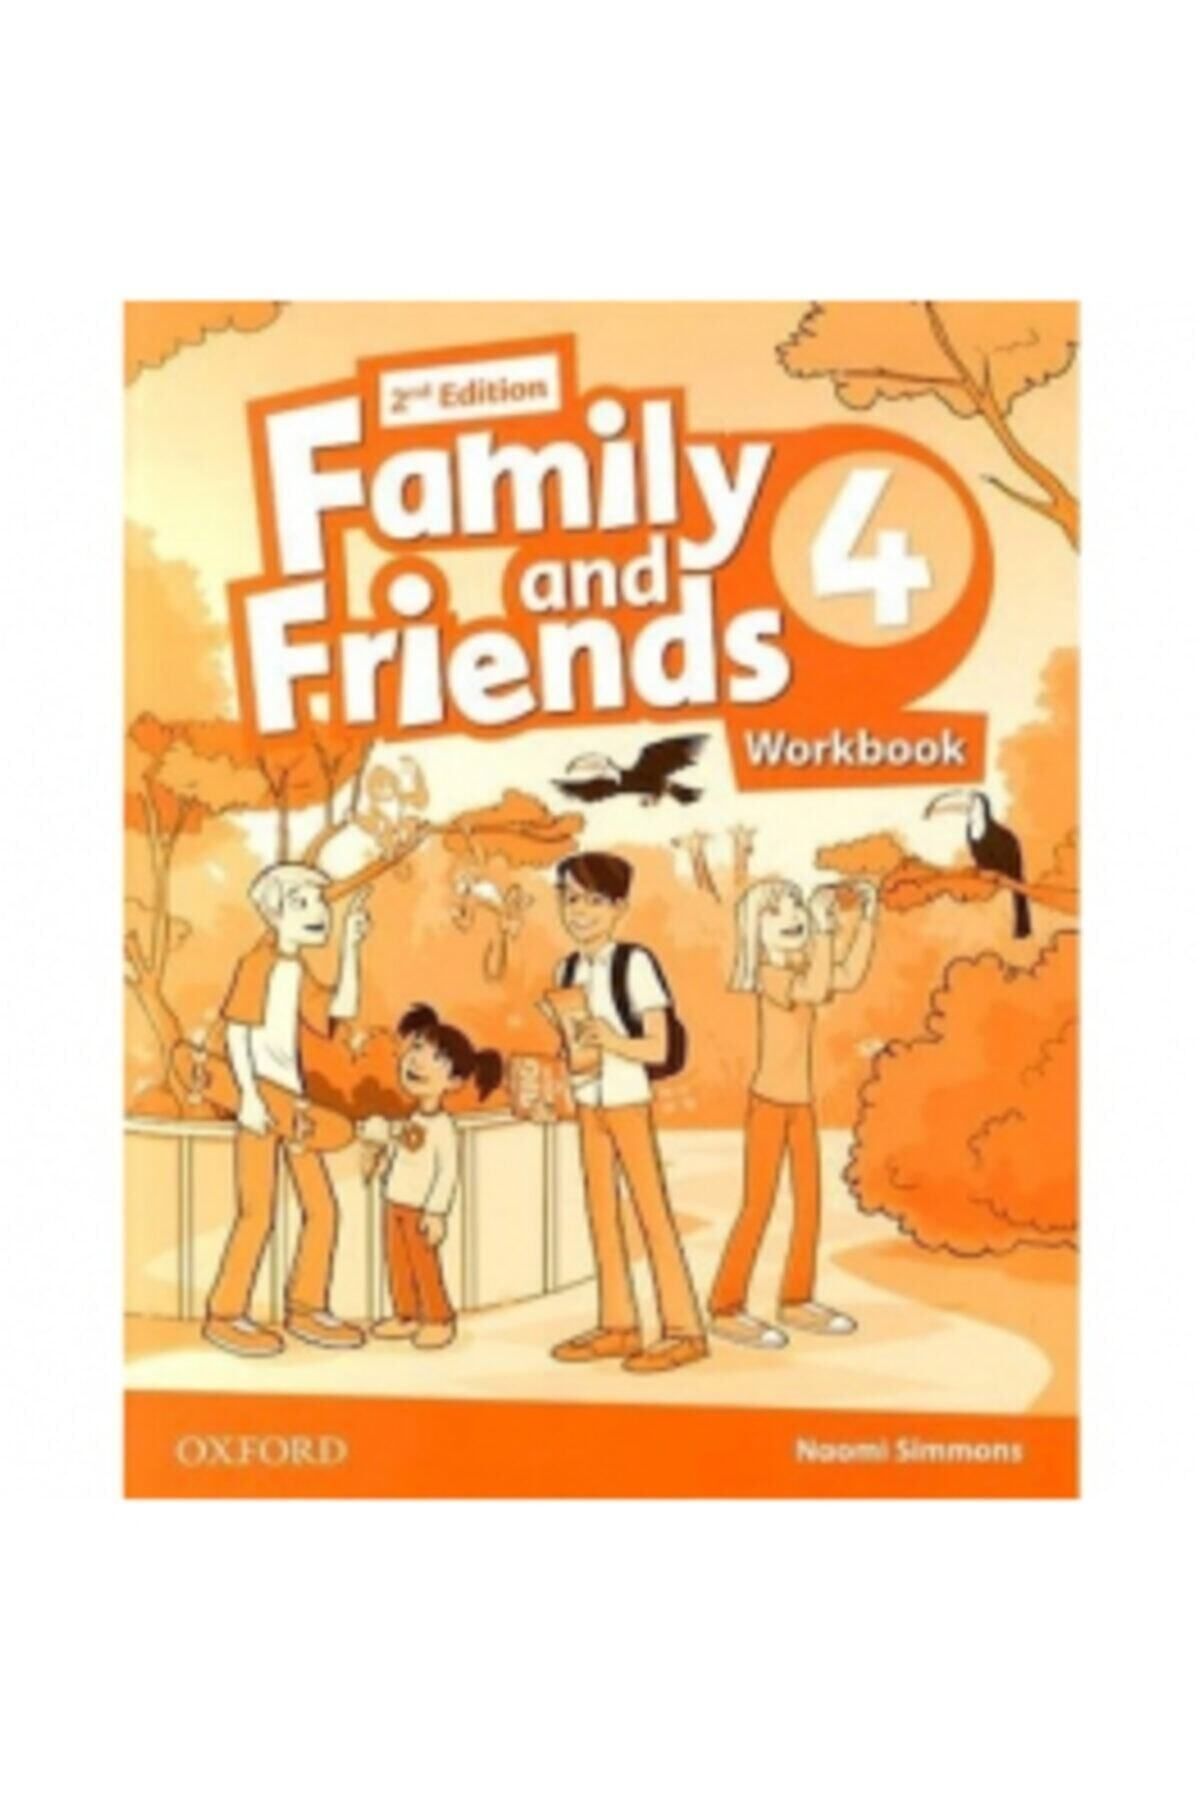 Family and friends 4 2nd edition workbook